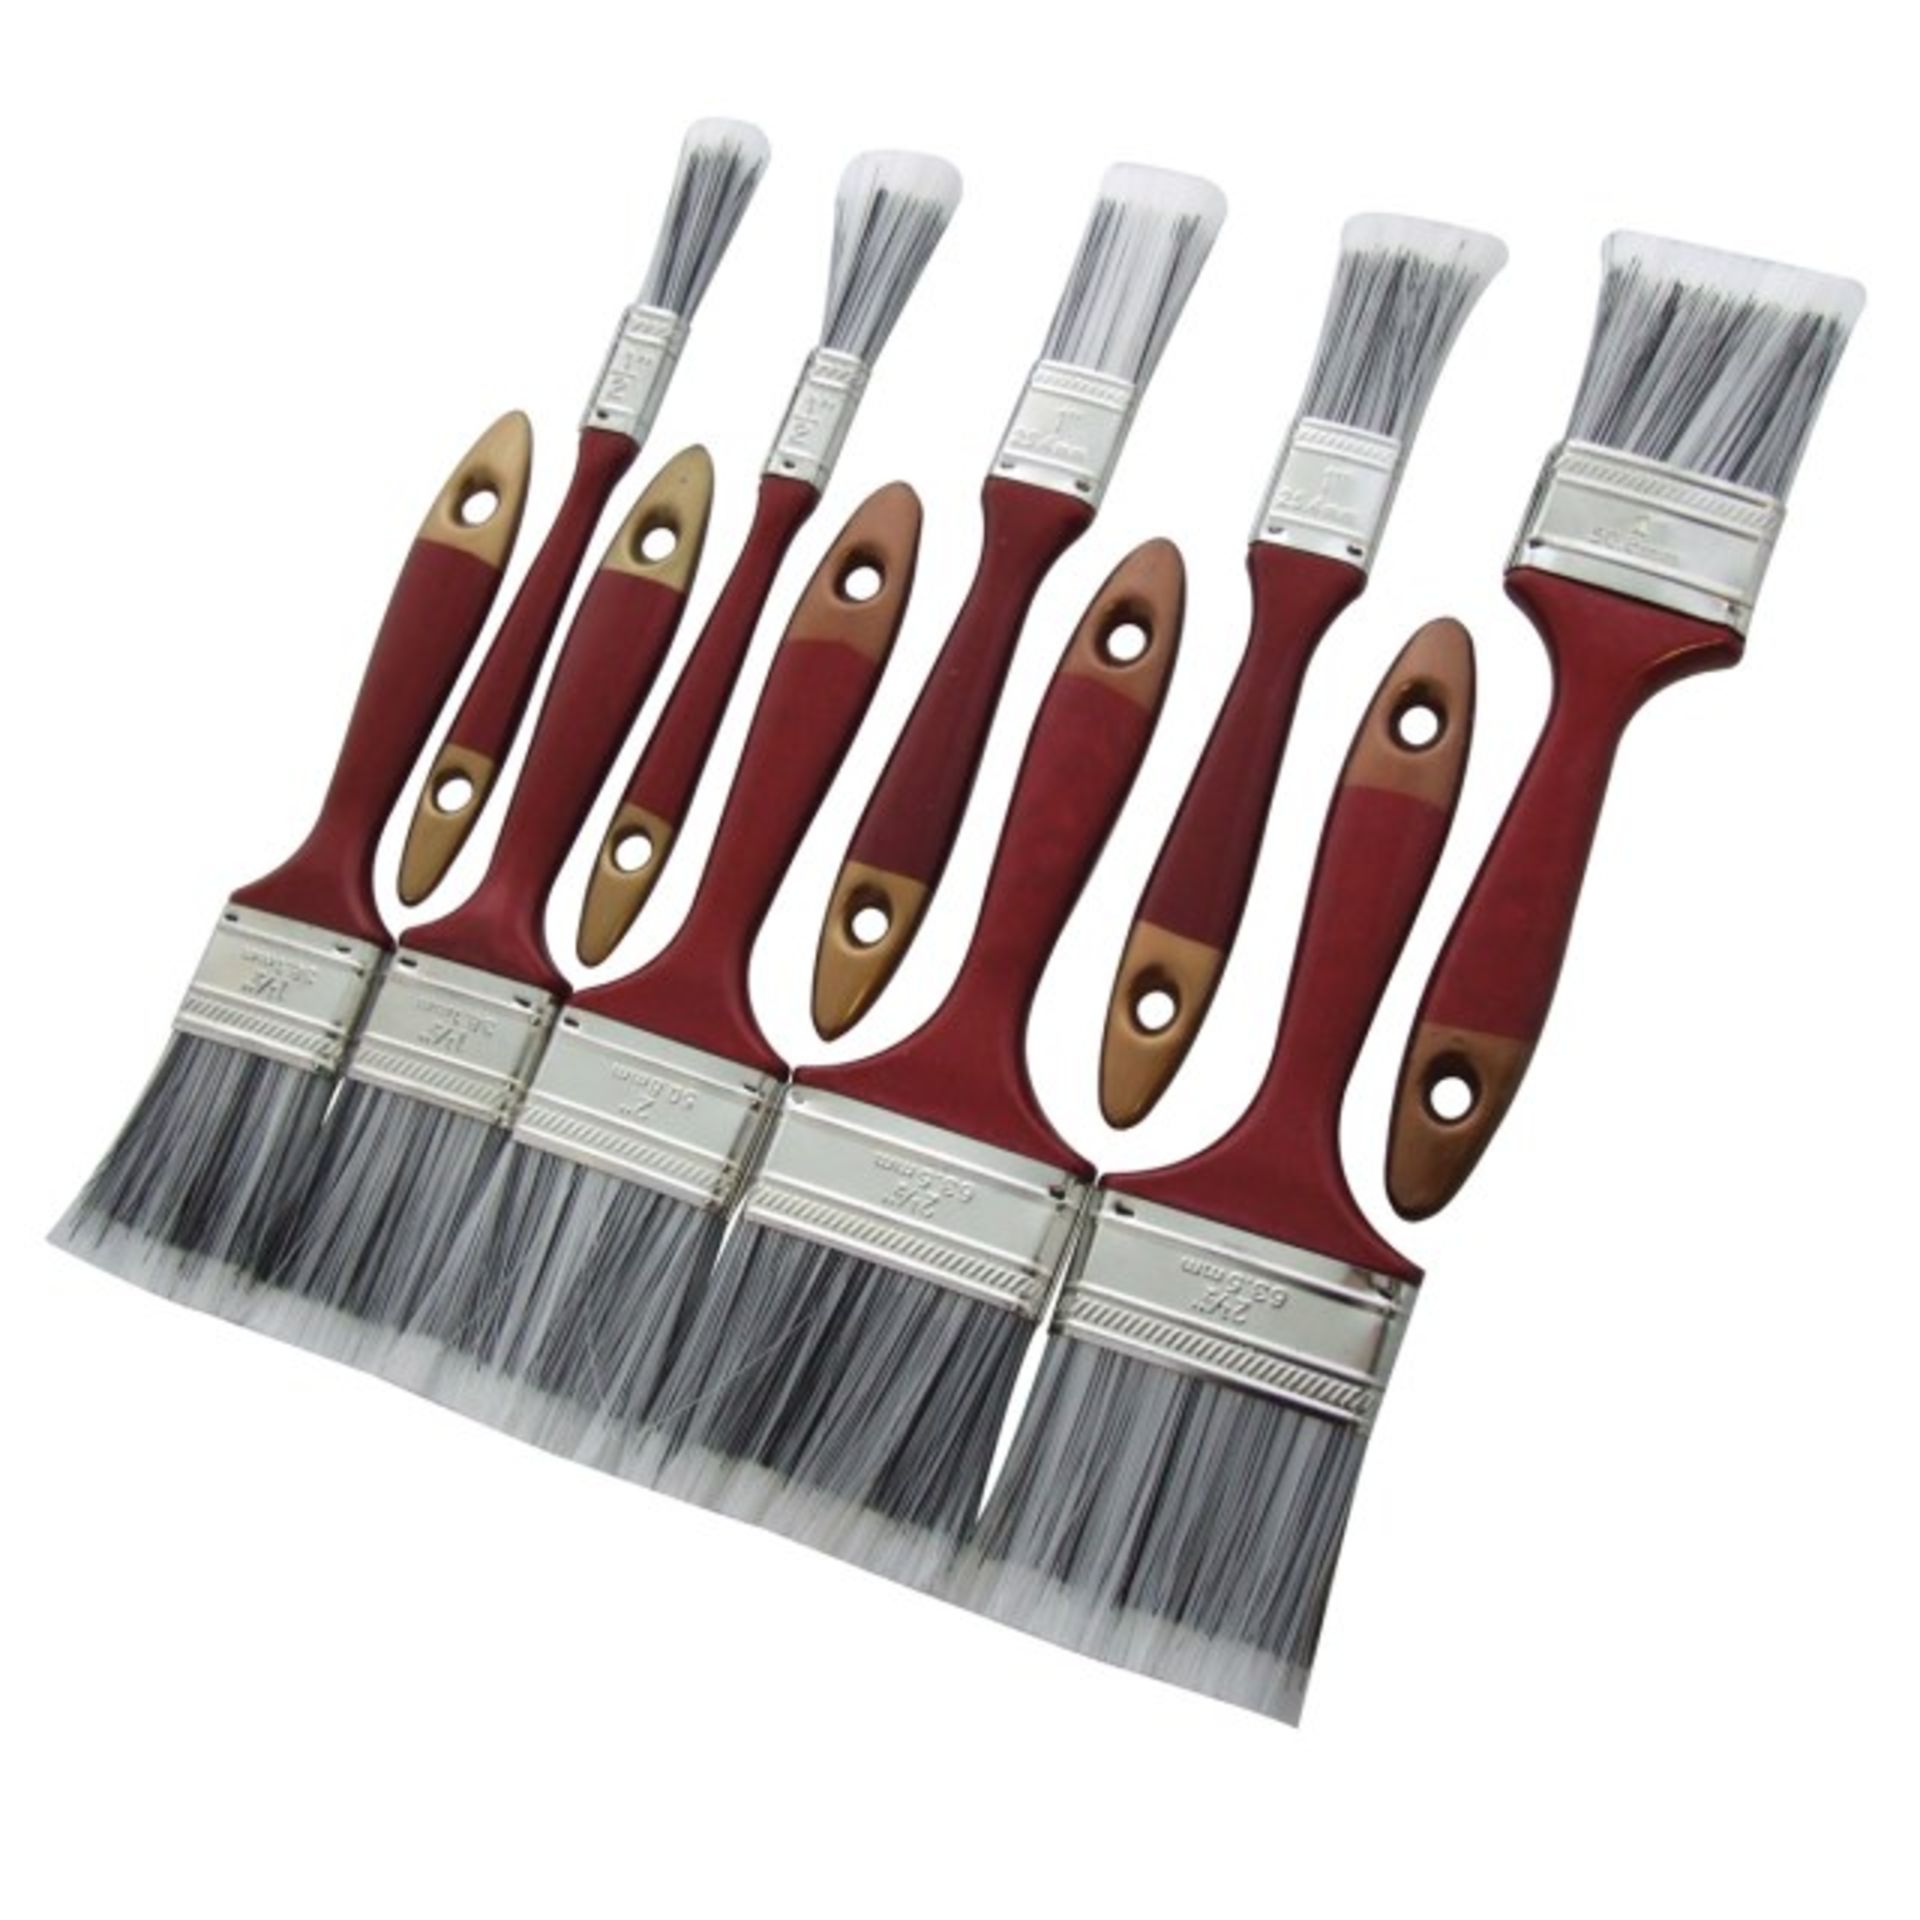 V *TRADE QTY* Brand New 10 Piece Paint Brush set X 6 YOUR BID PRICE TO BE MULTIPLIED BY SIX